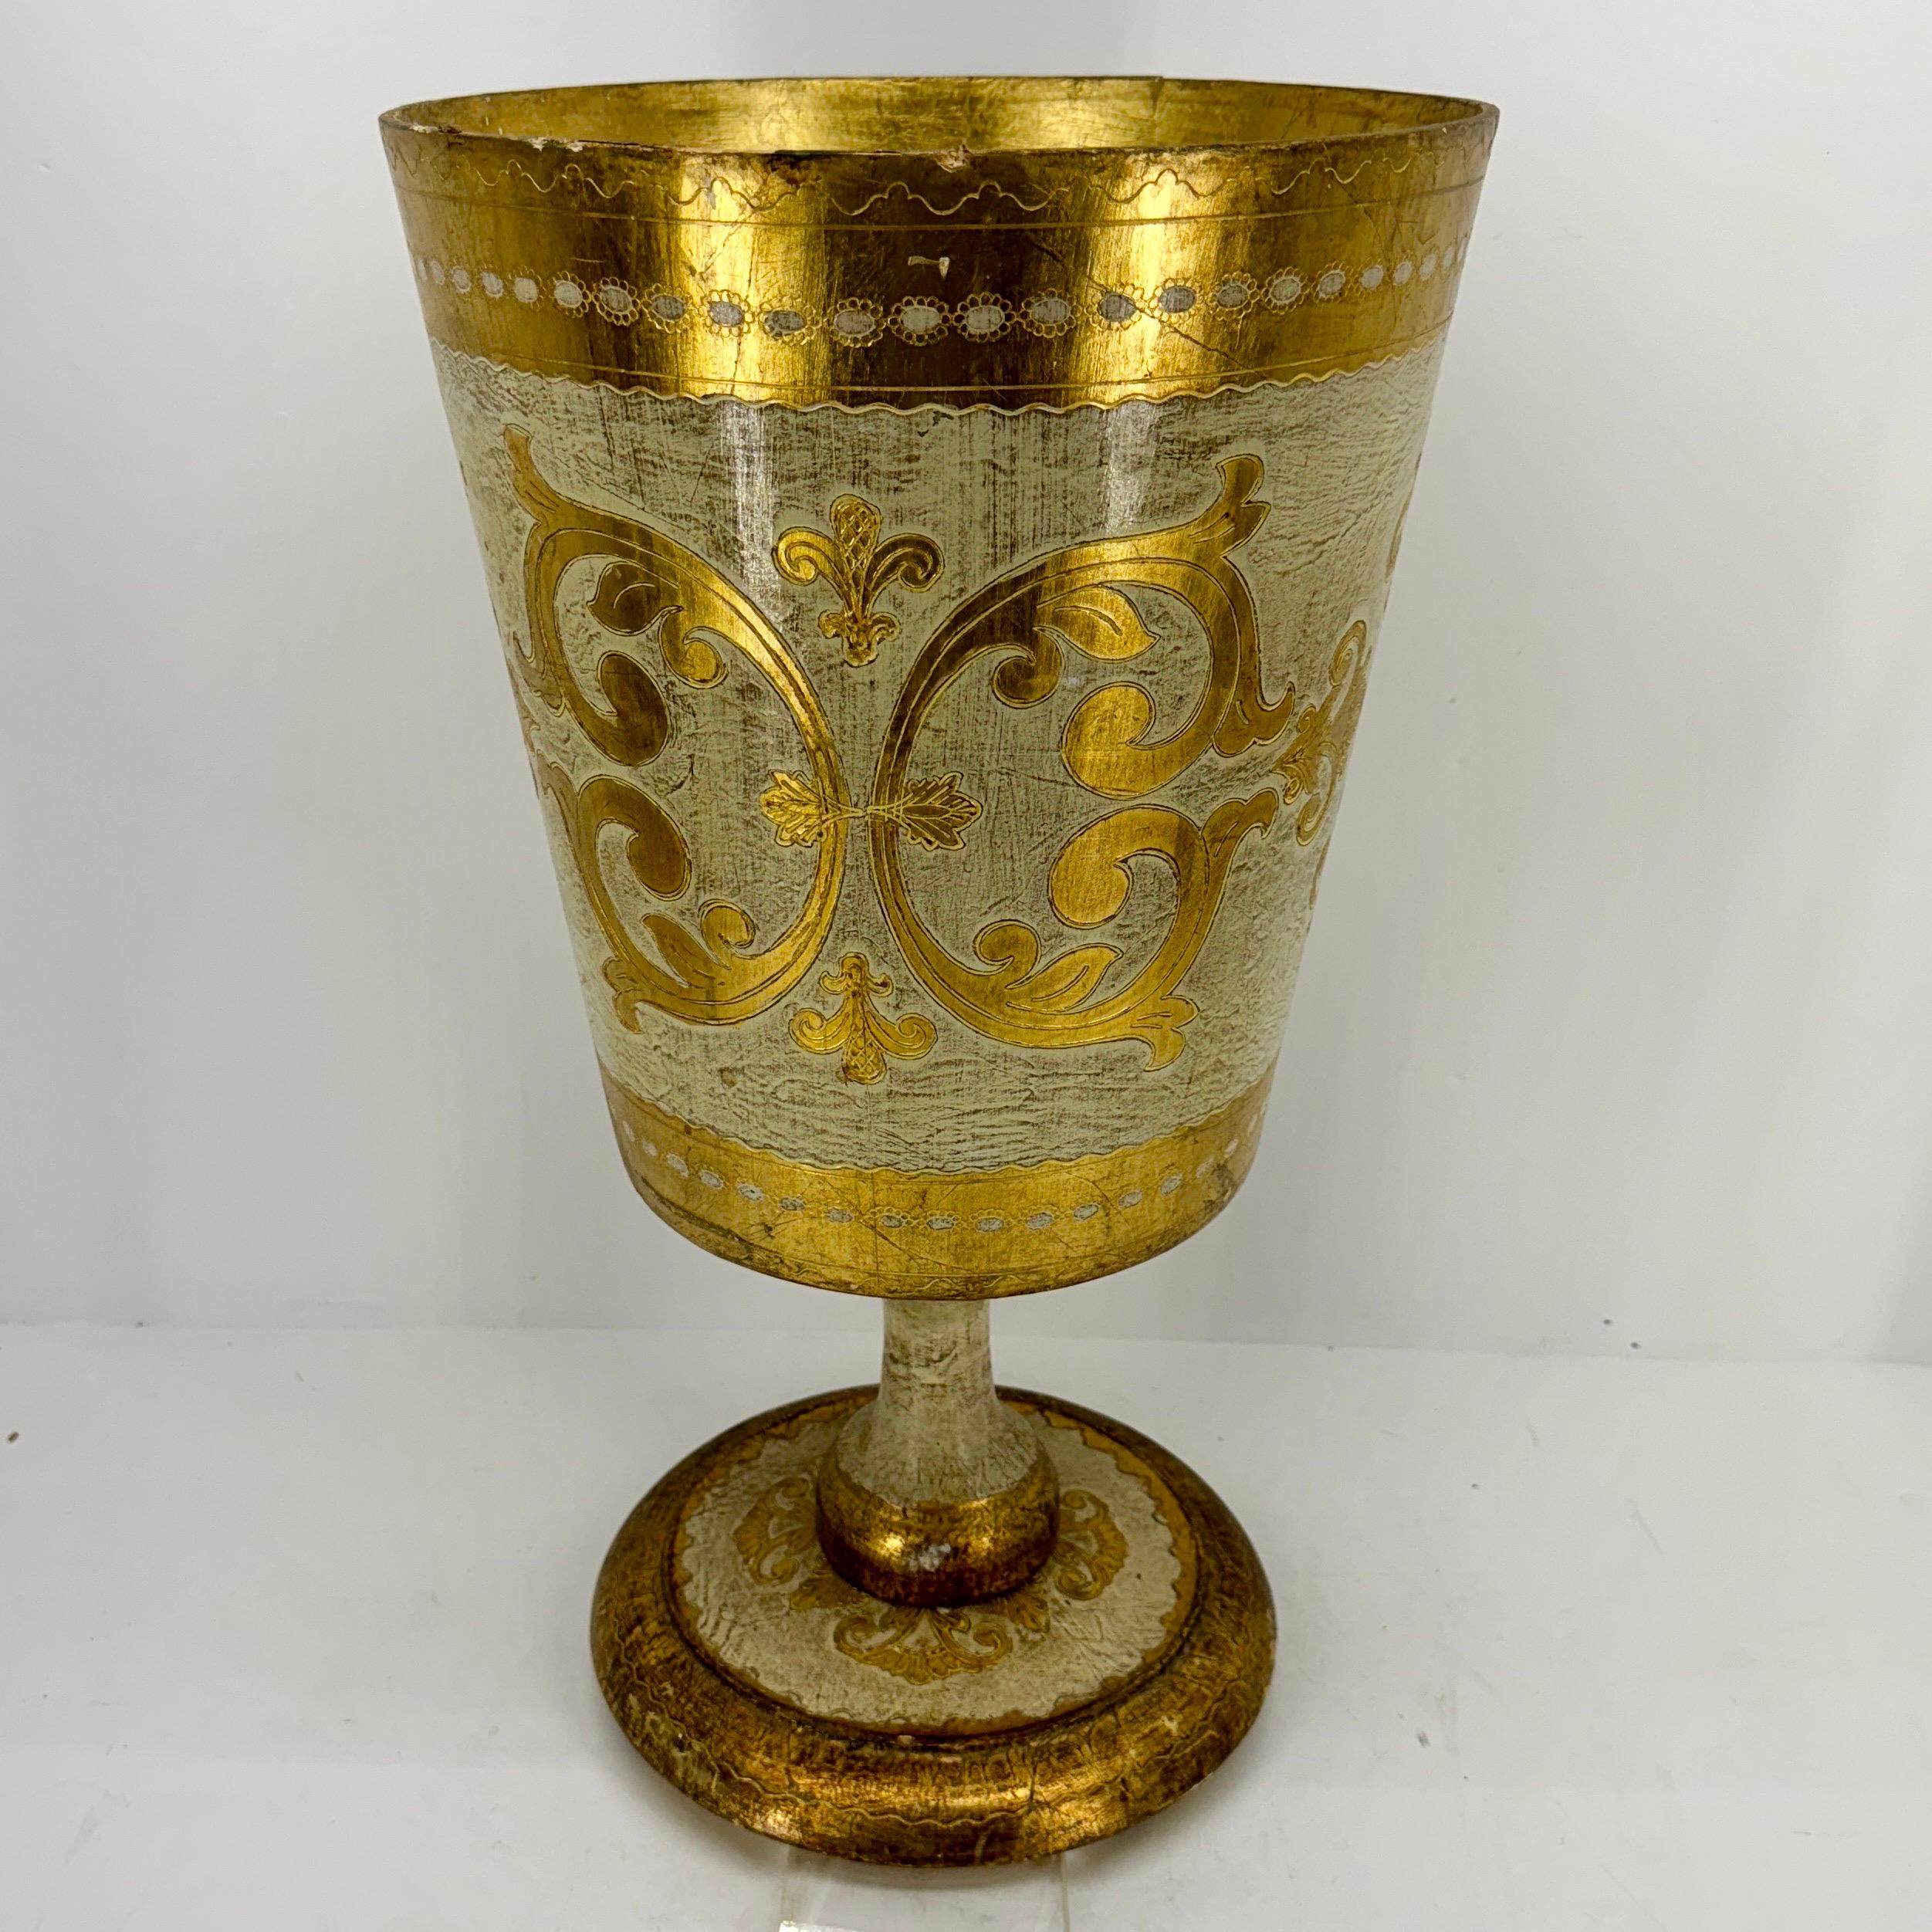 20th Century Large Italian Florentine Gold and Cream Urn Planter For Sale